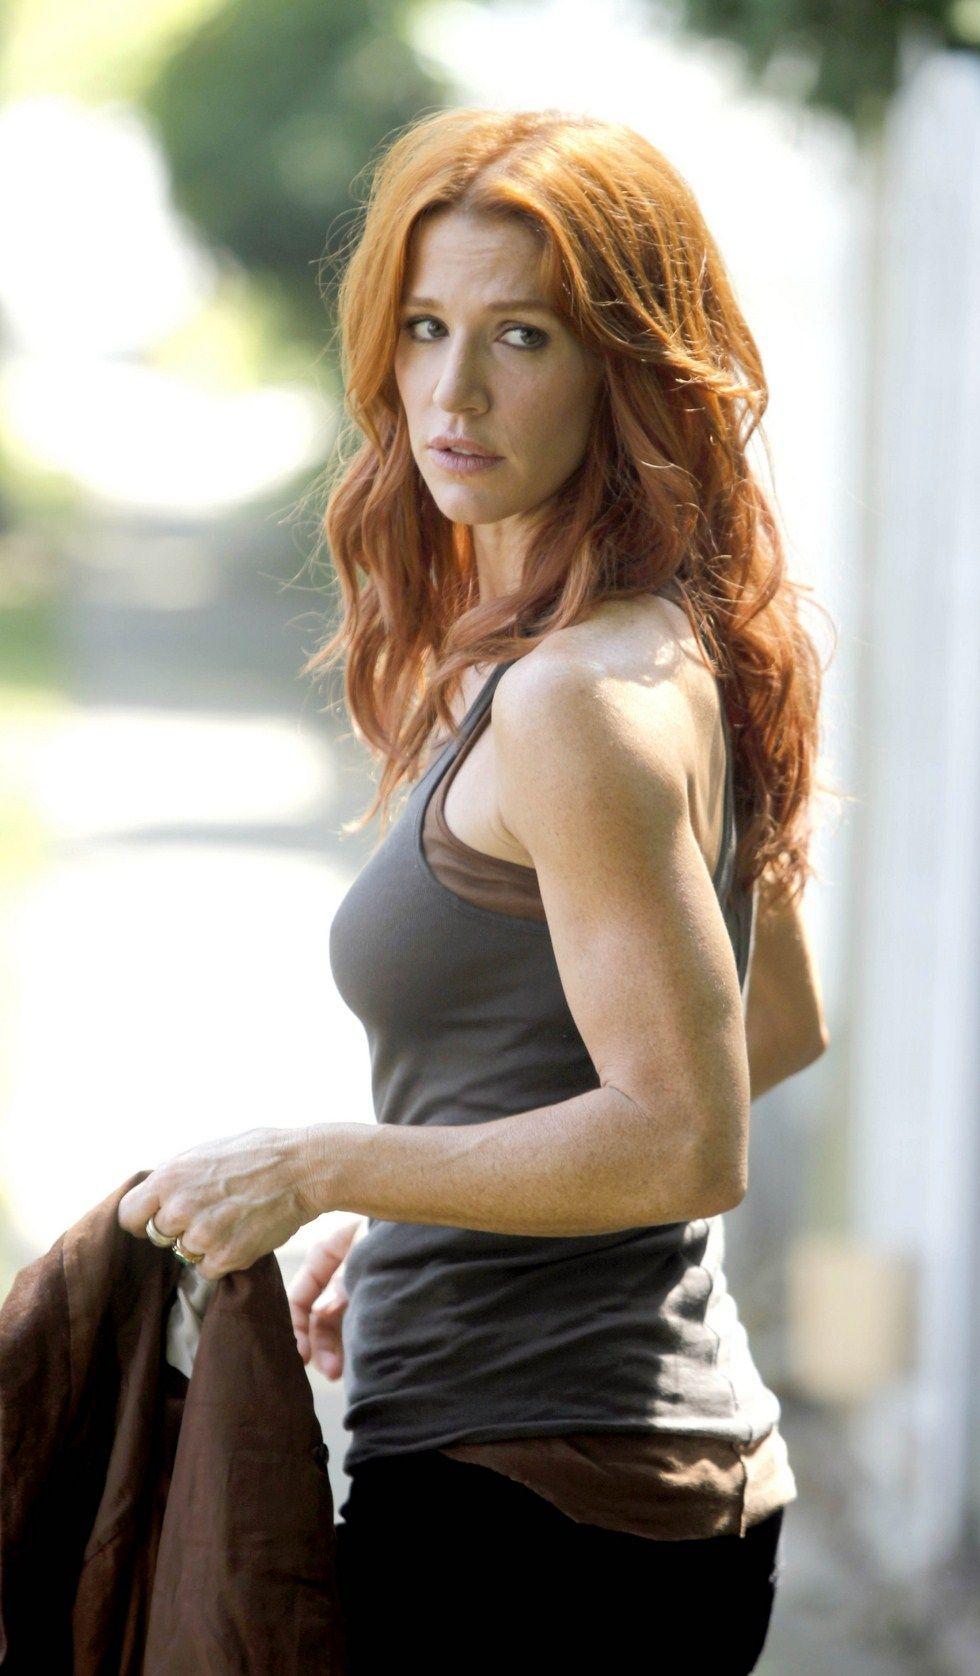 75+ Hot Pictures Of Poppy Montgomery Is No Less Than Slice Of Heaven On Earth | Best Of Comic Books